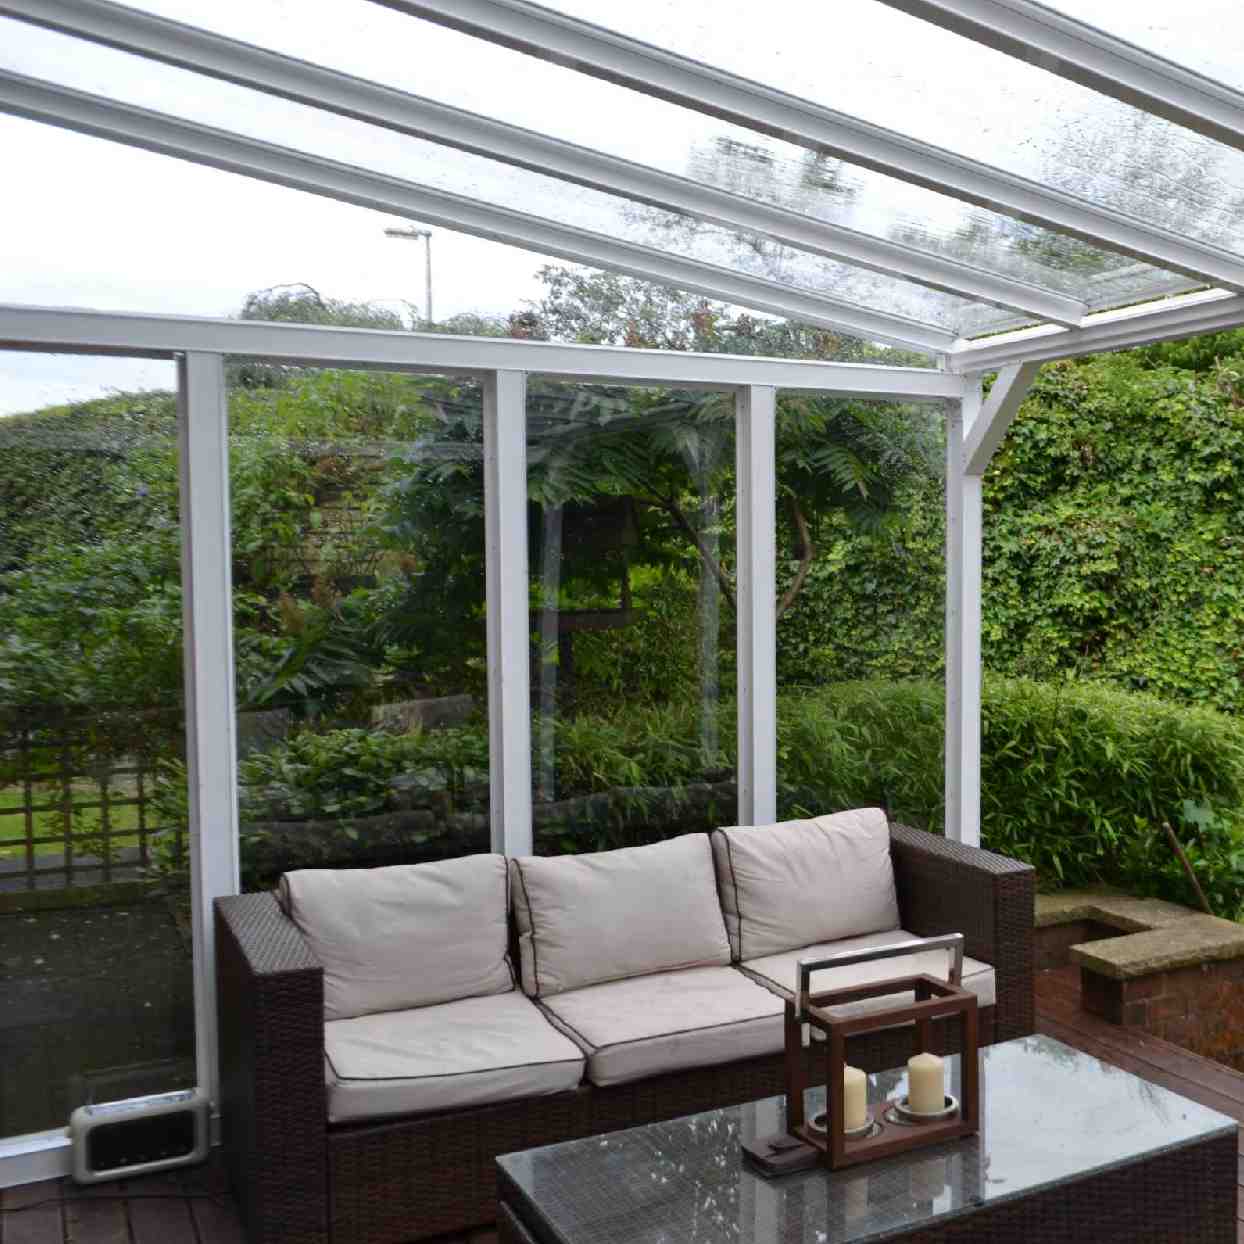 Buy Omega Verandah White with 16mm Polycarbonate Glazing - 12.0m (W) x 2.5m (P), (5) Supporting Posts online today